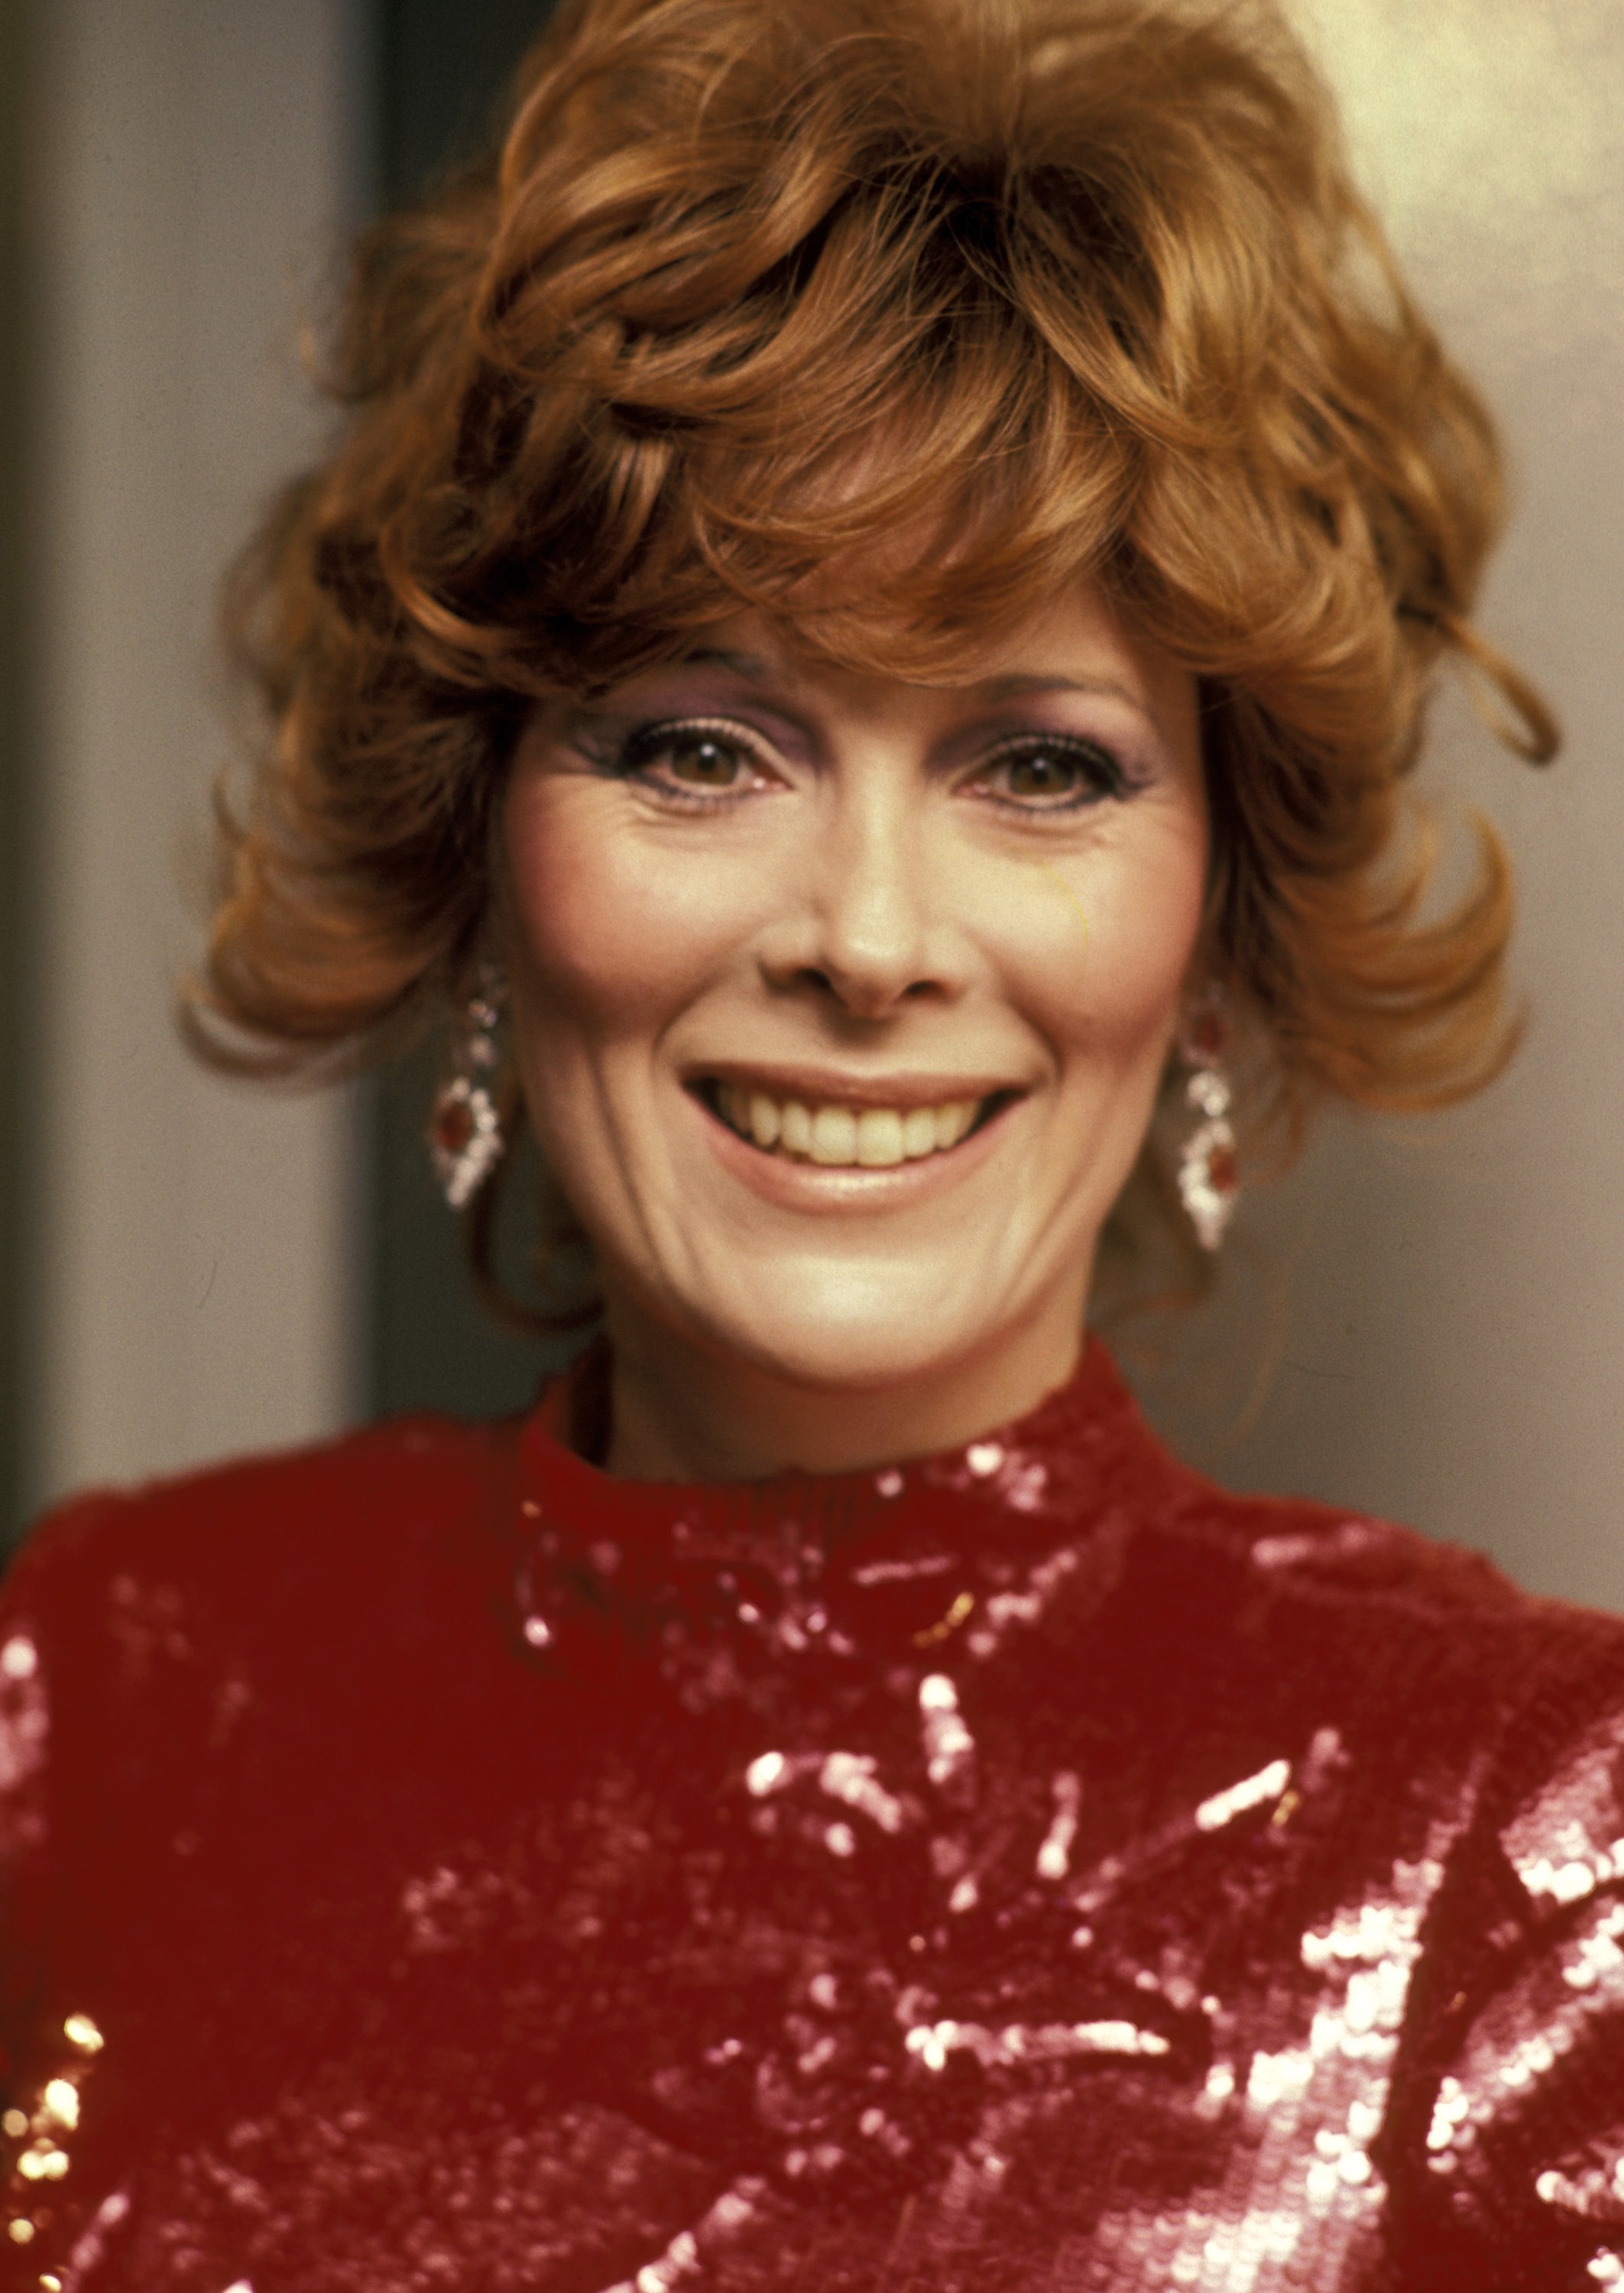 Actress Jill St. John during taping of Bob Hope Special "The Road to Hollywood" at NBC Television Studios on February 20, 1983 in Burbank, California┃Source: Getty Images